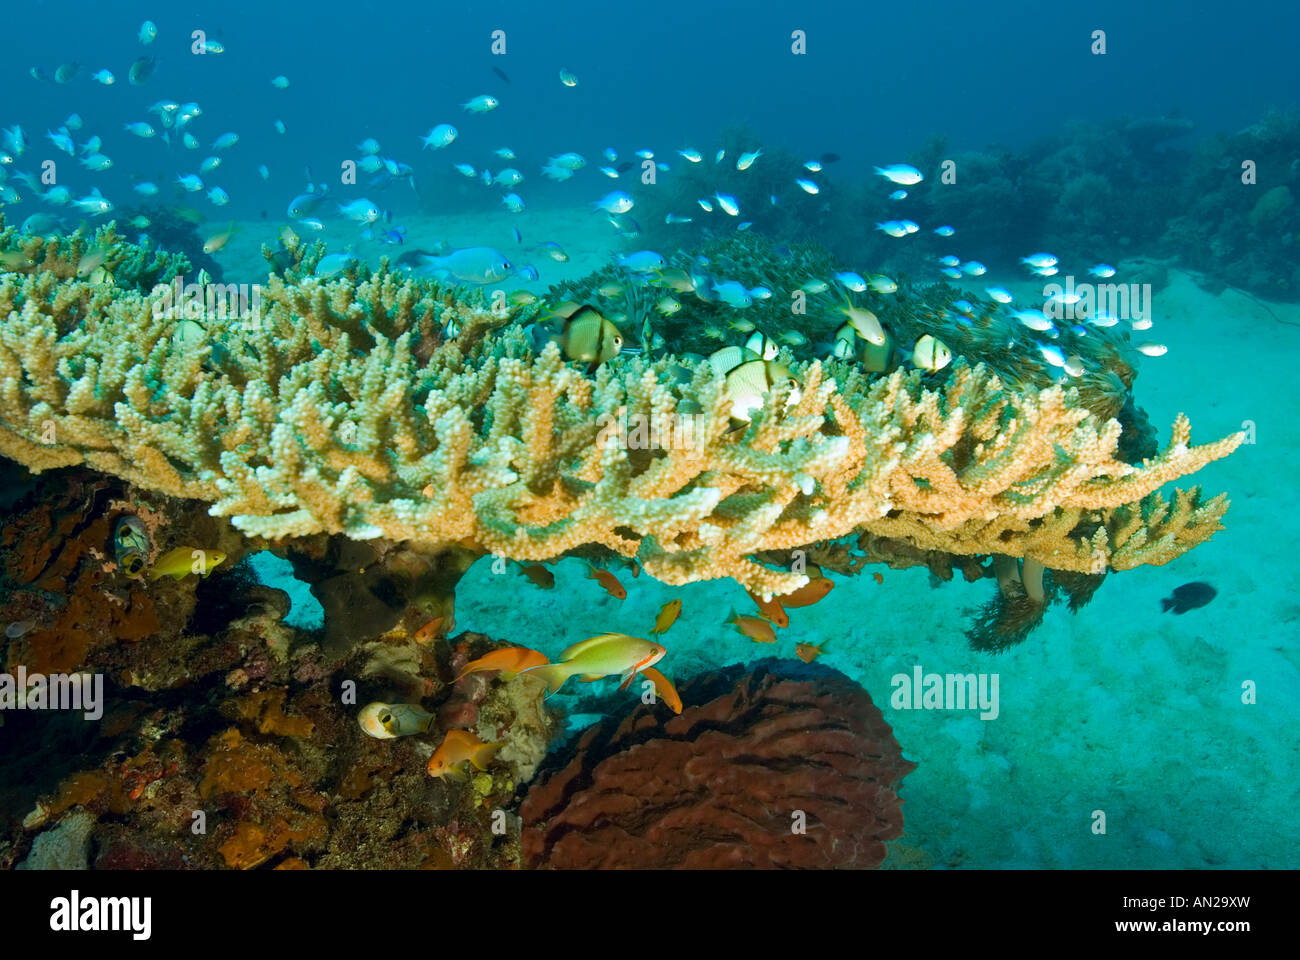 Table coral and hiding damsel fishes between branches Komodo National Park Indonesia Stock Photo